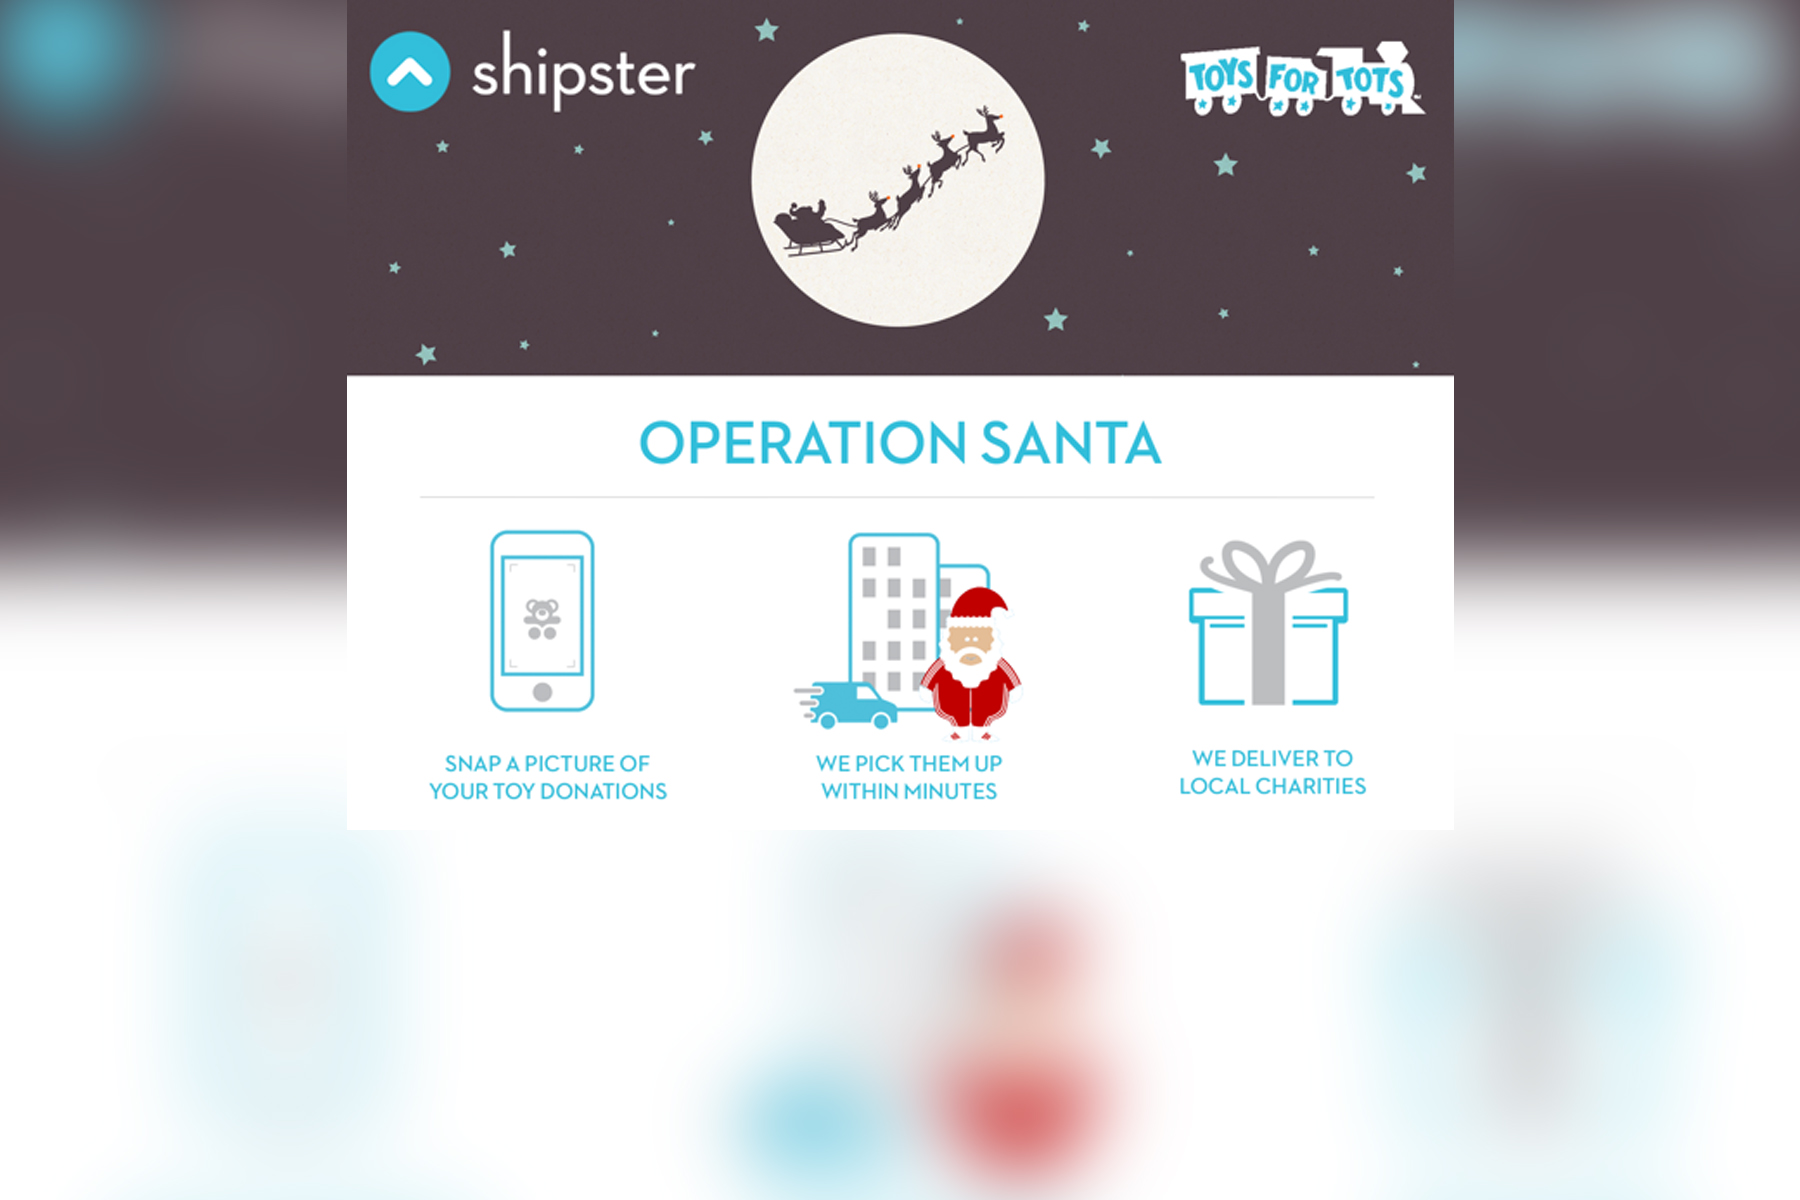 PHOTO: Shipster users could donate toys by taking a picture of the items they want delivered to local charities.
